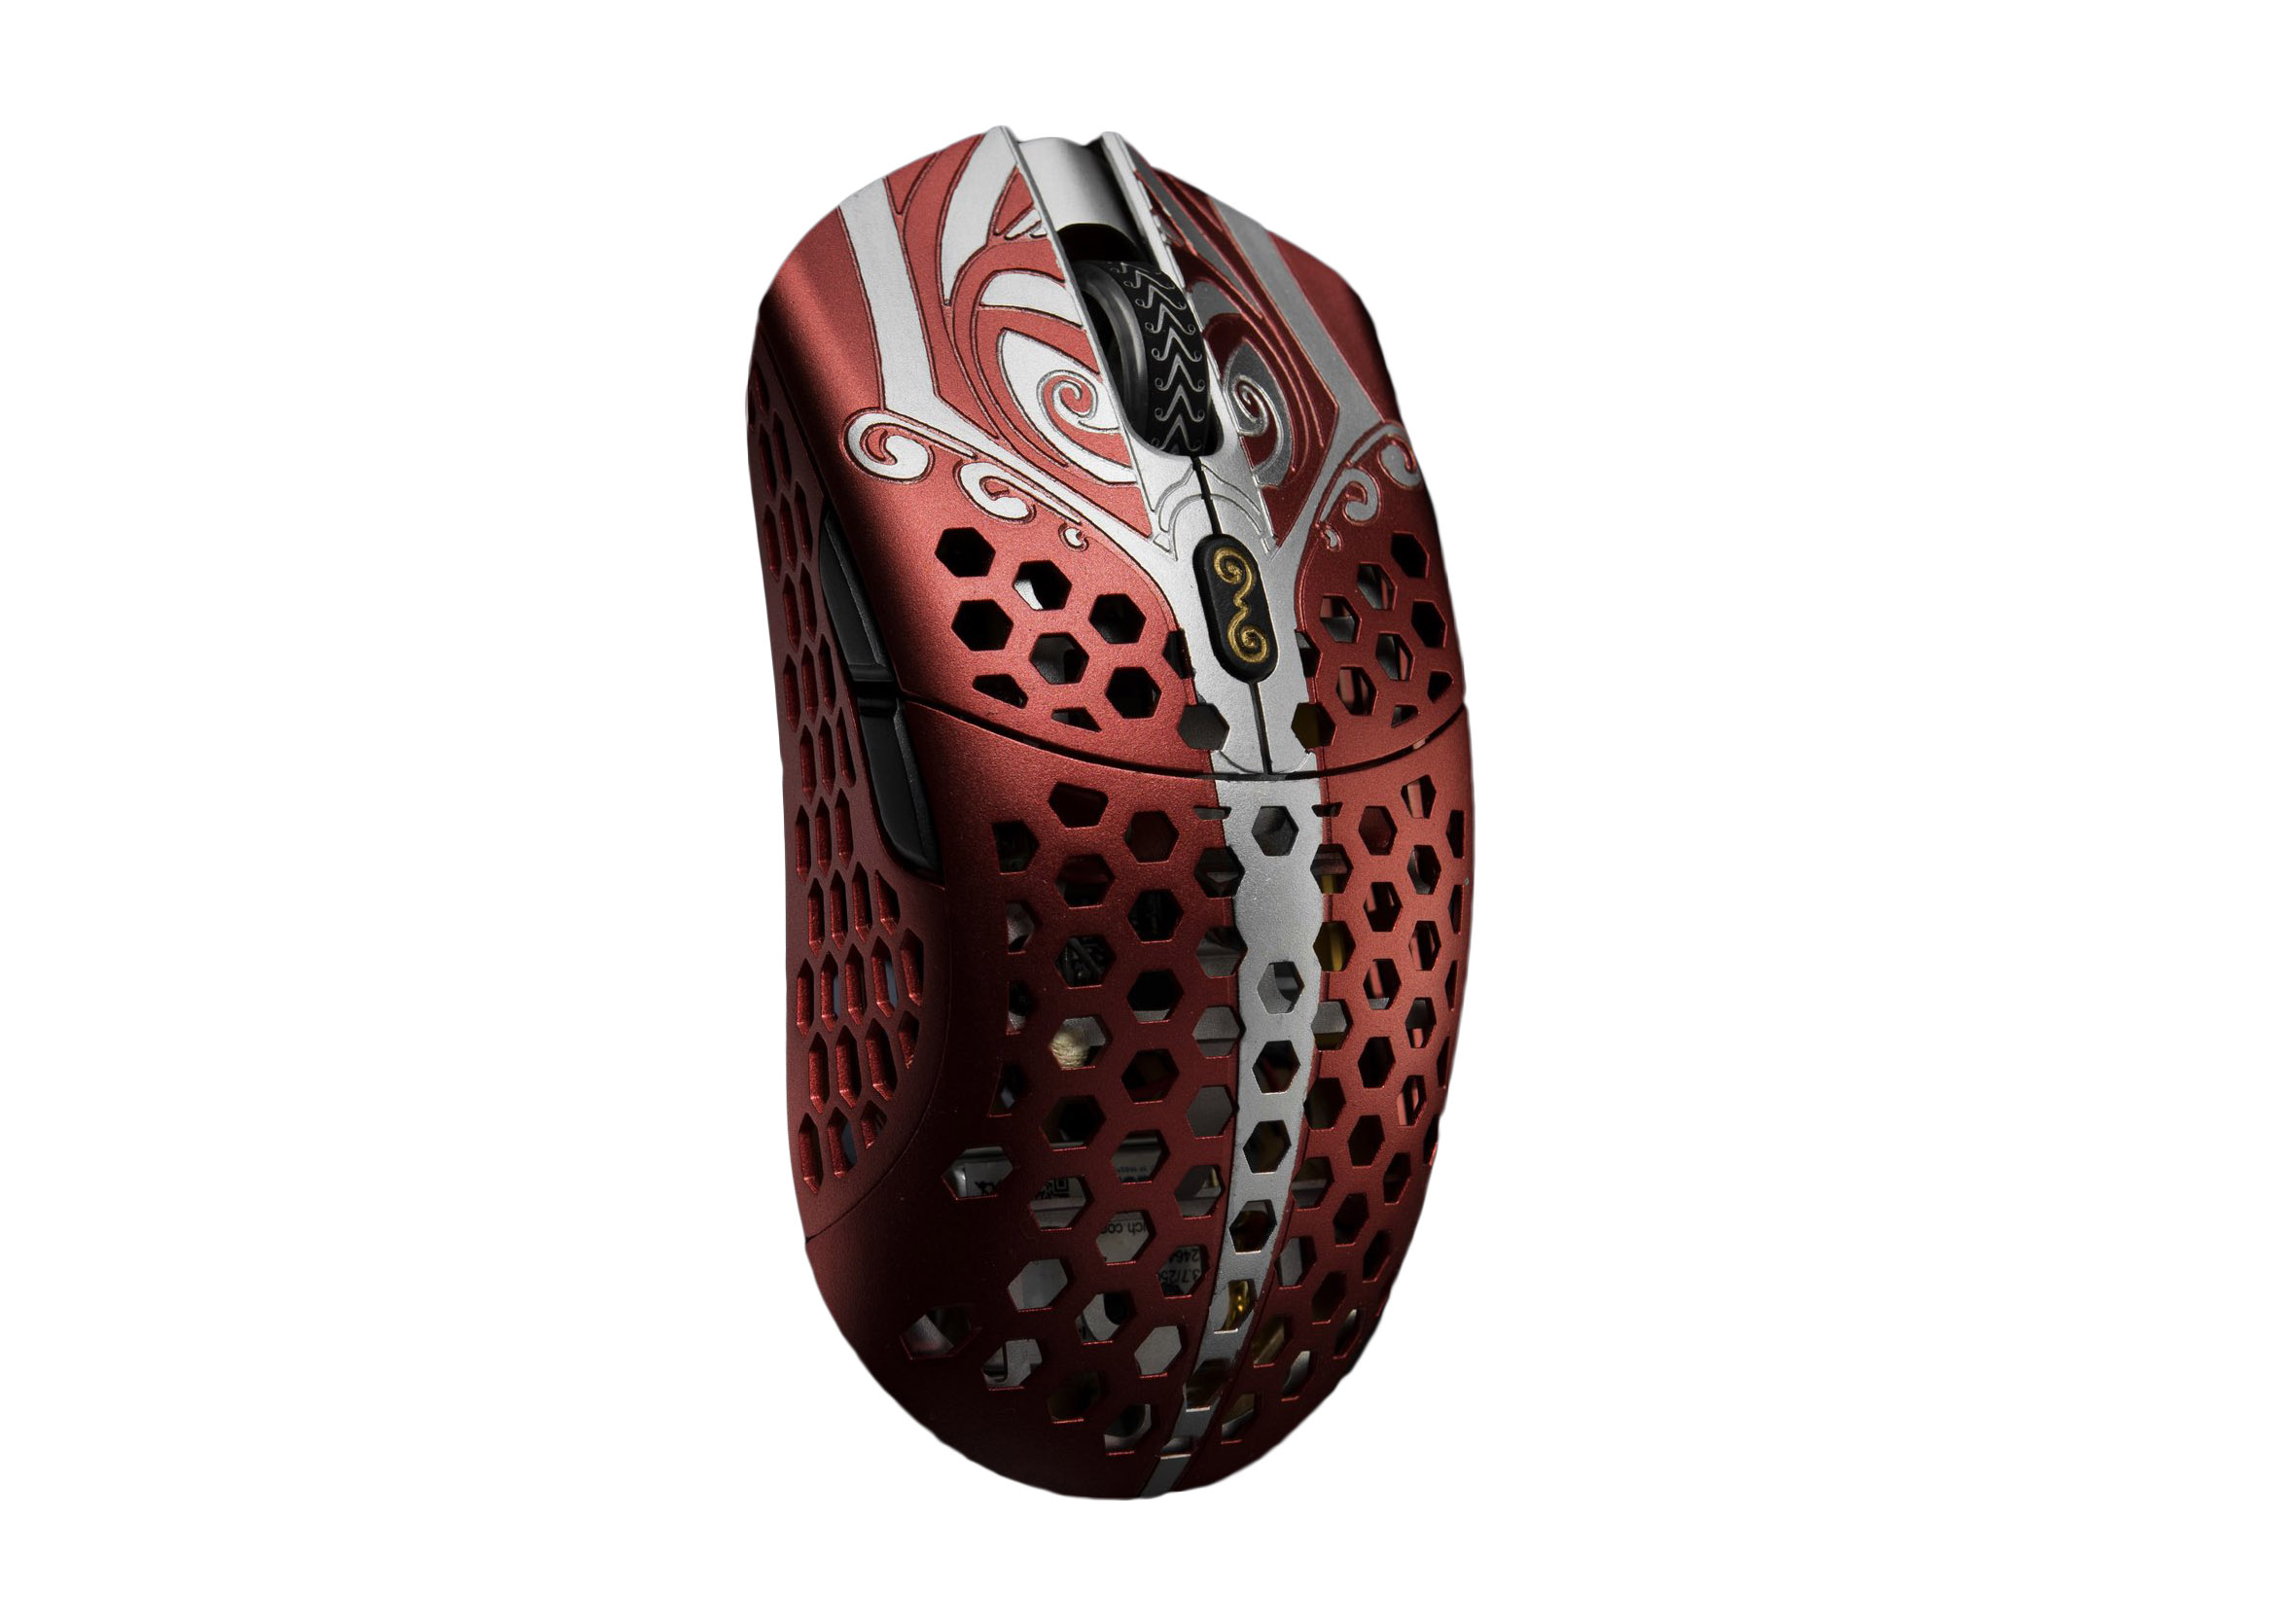 Finalmouse Starlight-12 Wireless Mouse Small Ares God of War